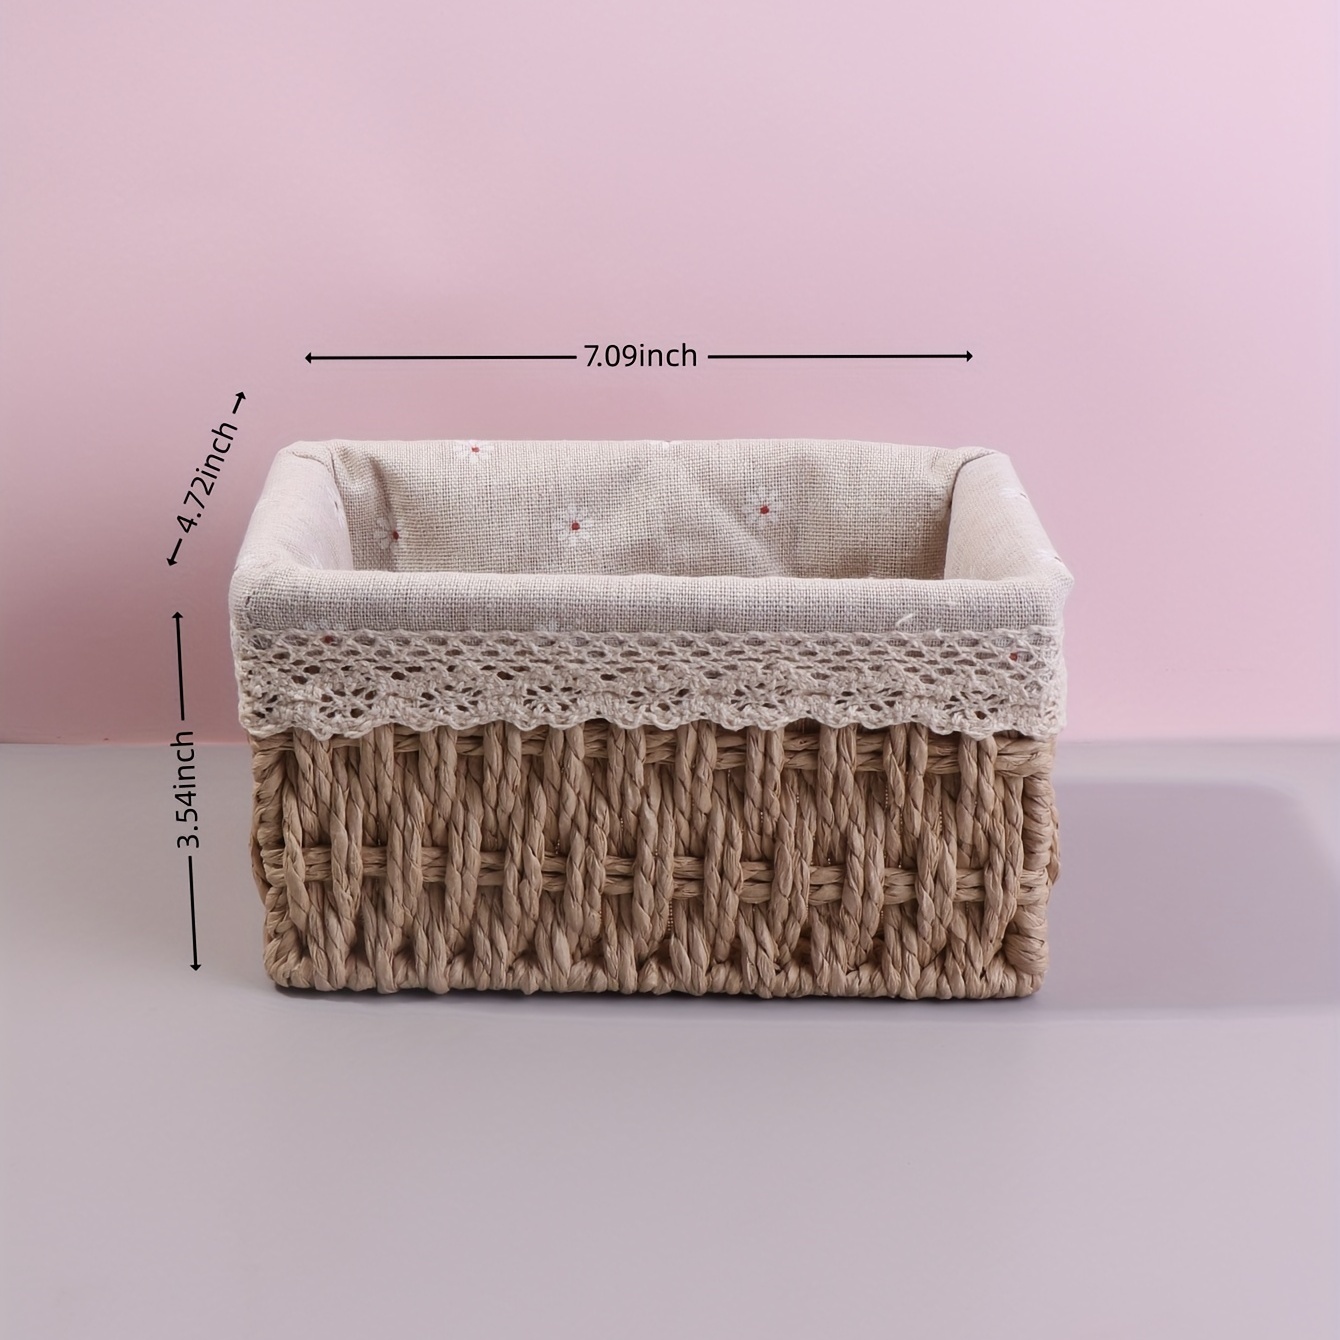 Rectangle small wicker baskets for sundries 3pcs storage bins.